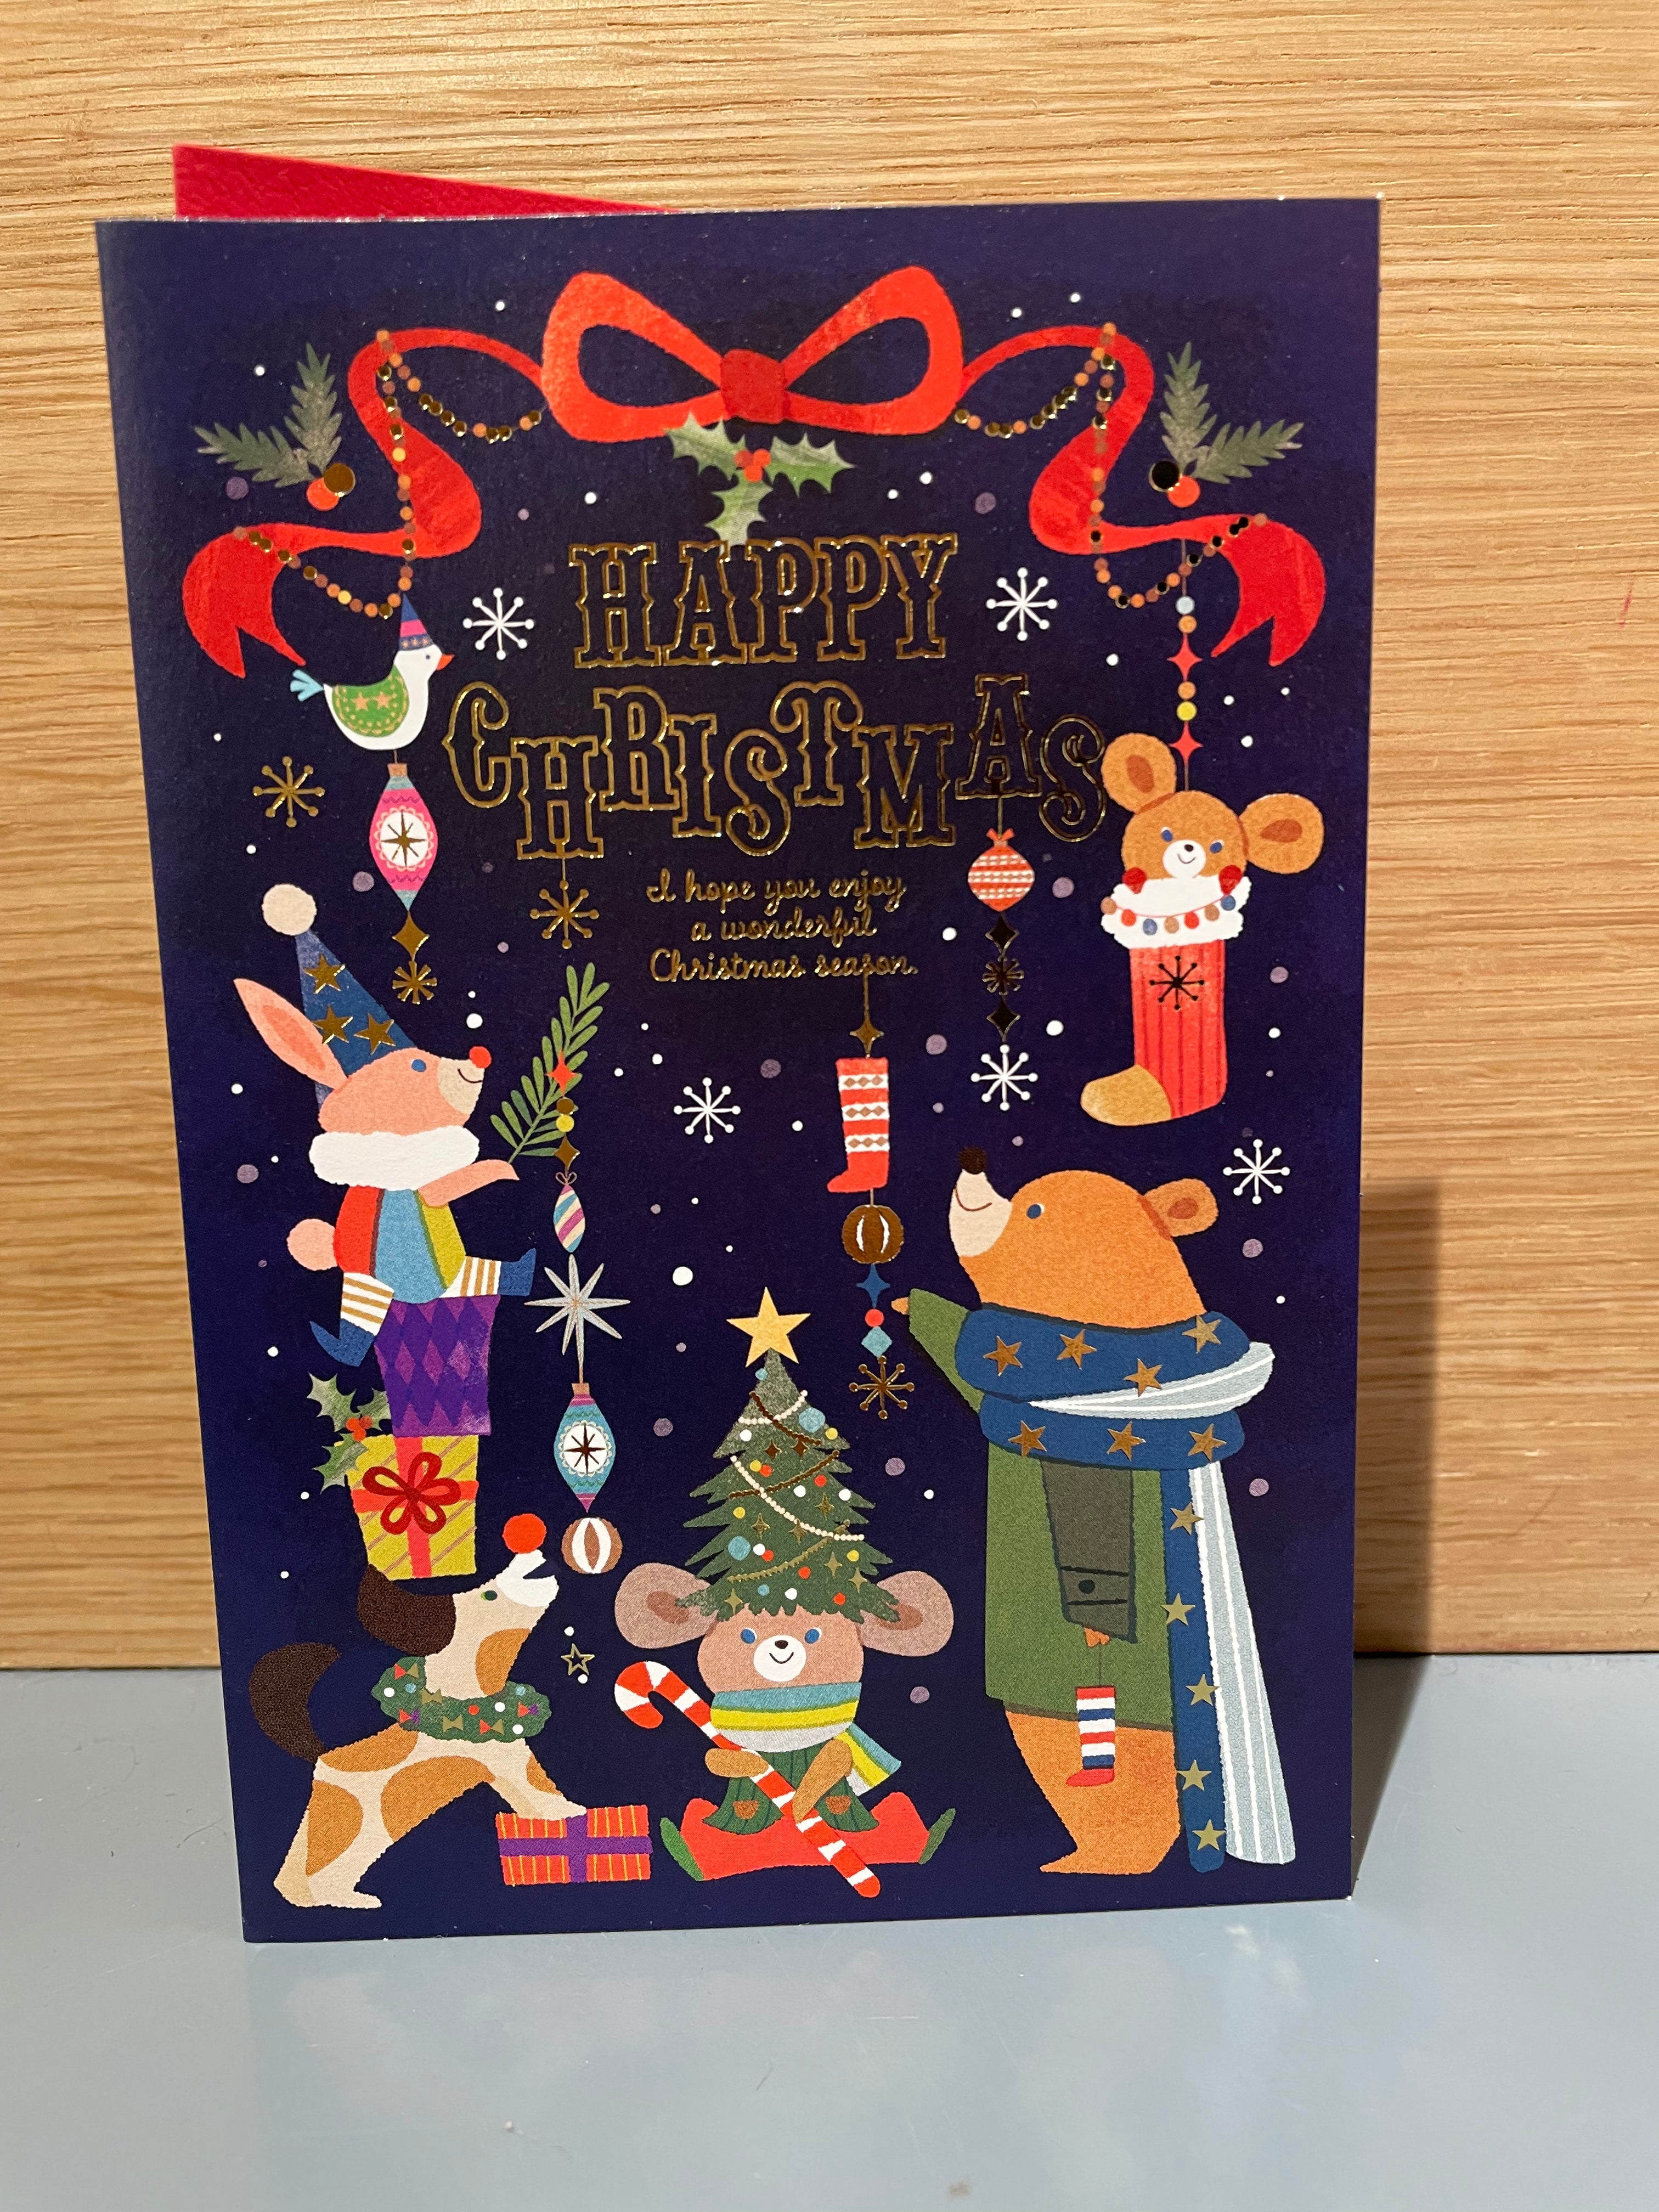 Christmas card with cute animals and gold details